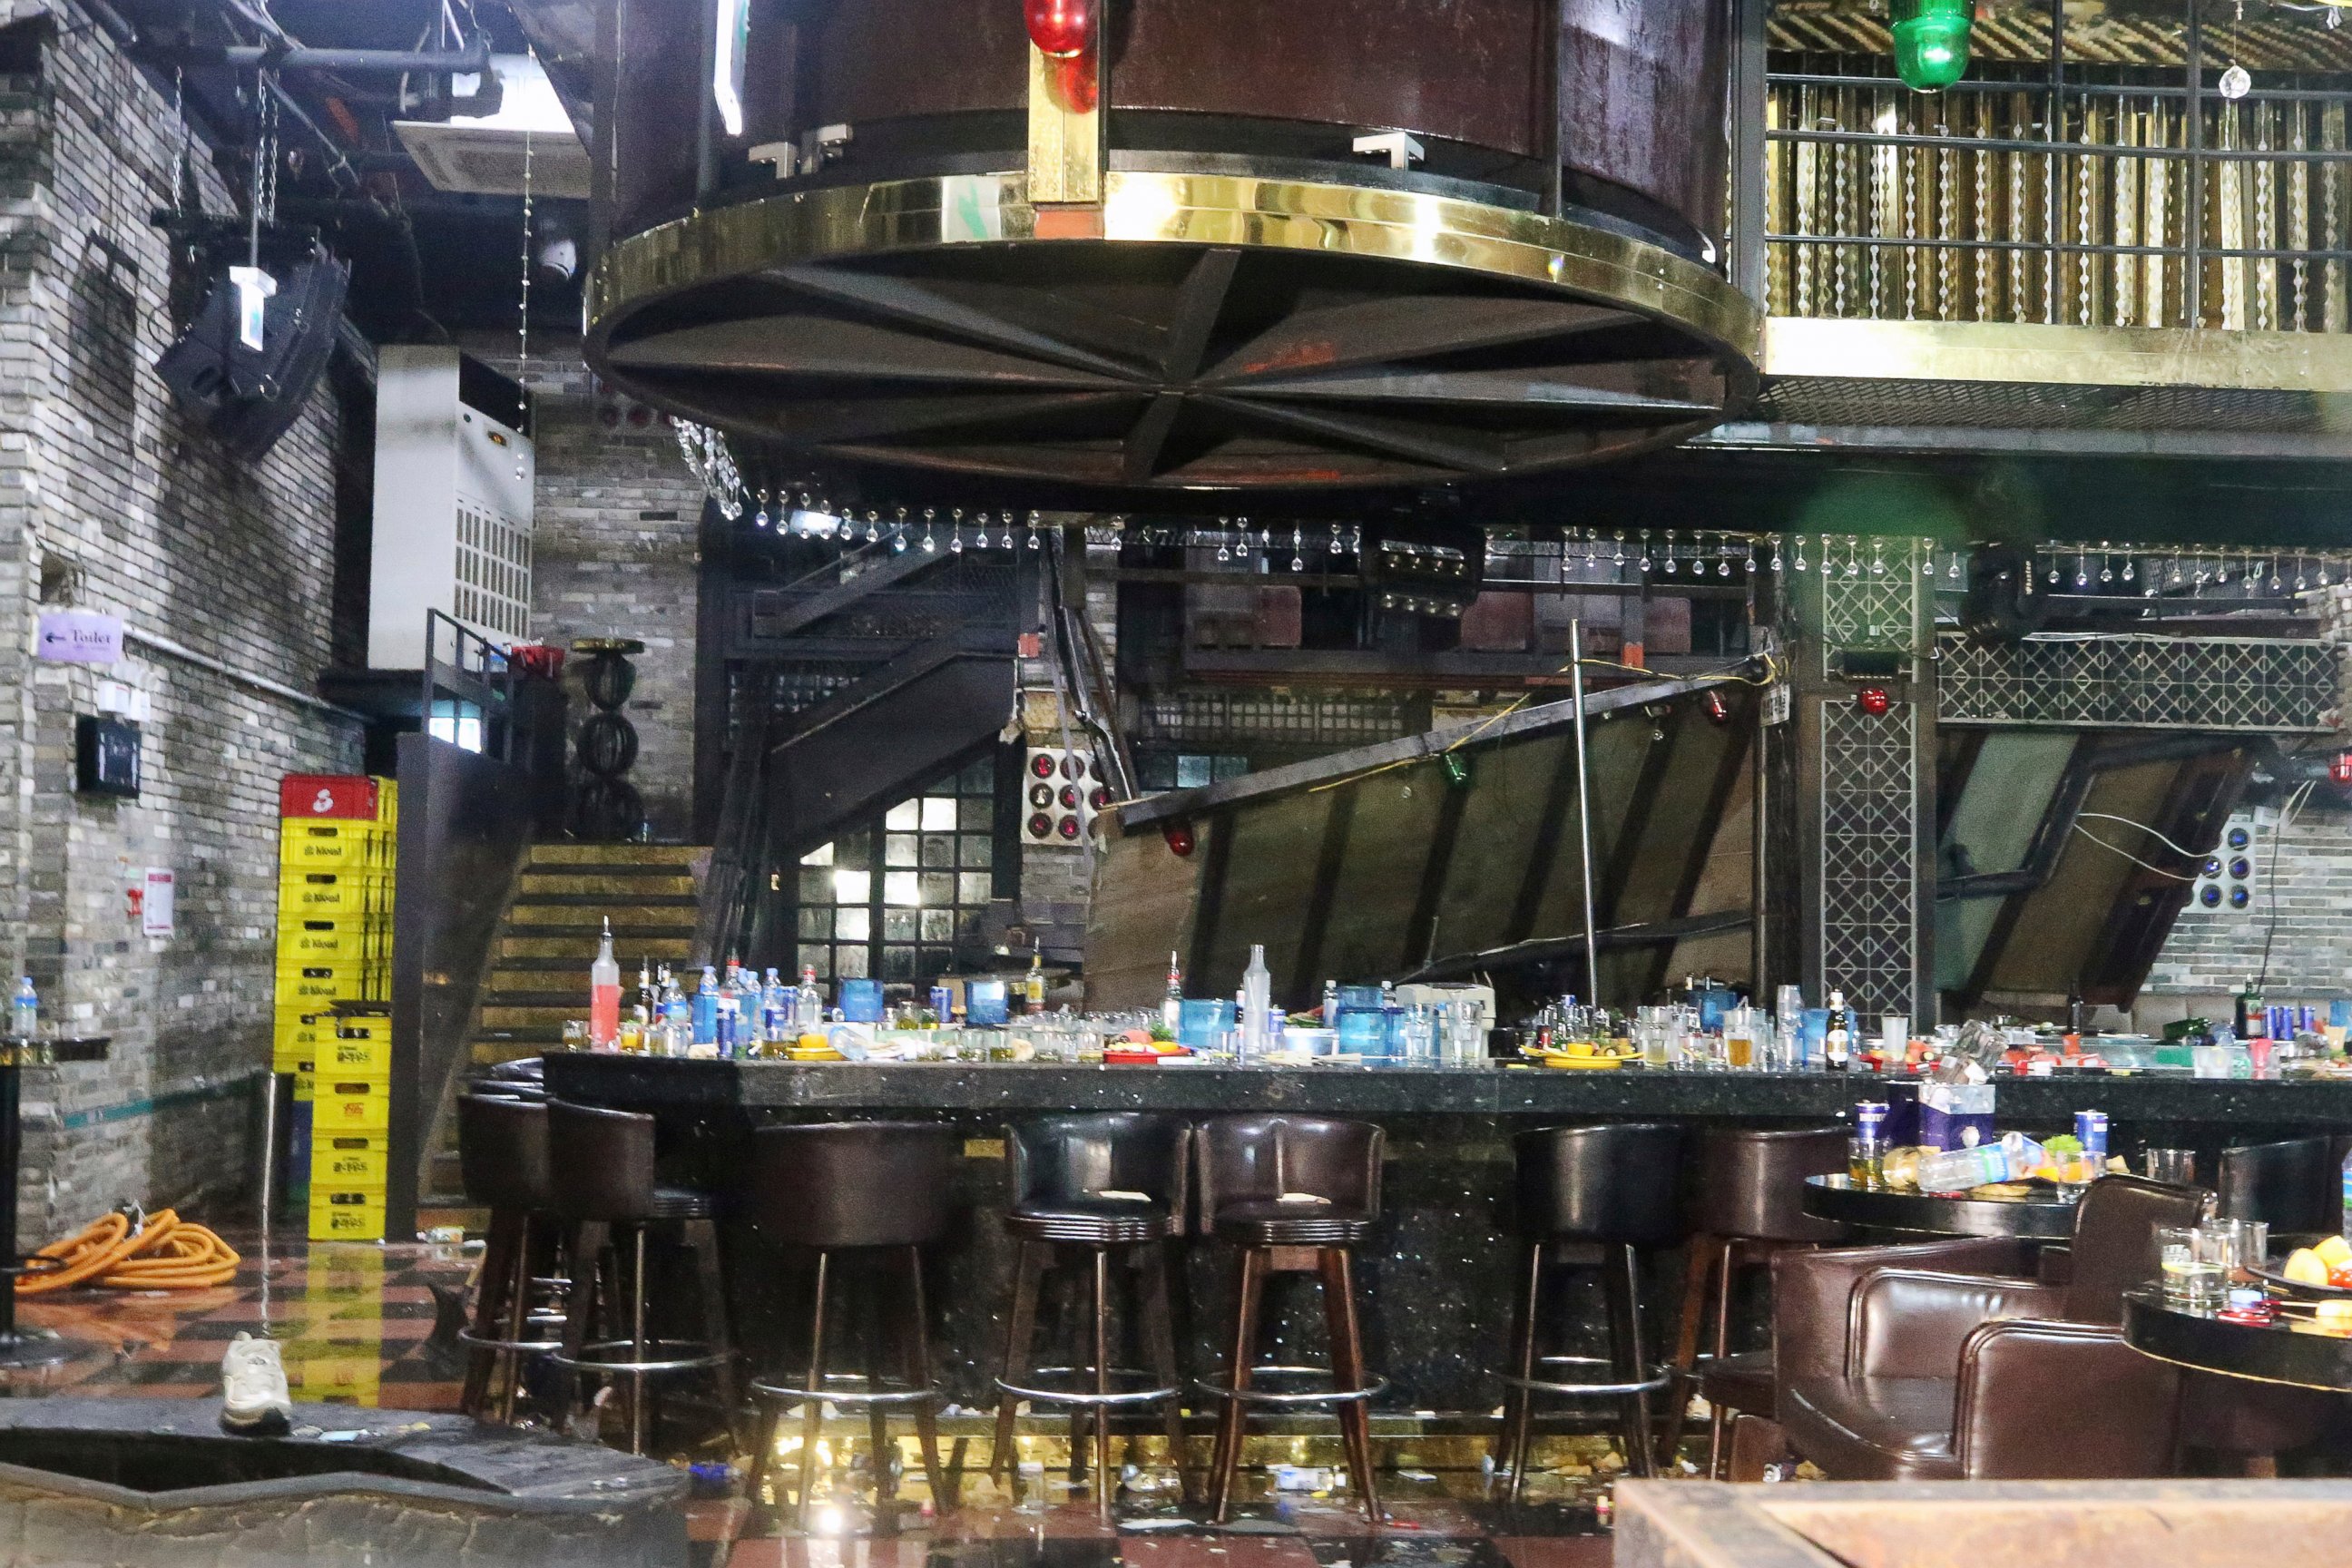 PHOTO: A collapsed internal balcony is seen at a nightclub in Gwangju, South Korea, Saturday, July 27, 2019. Members of the U.S. national water polo team were in a nightclub on Saturday when an internal balcony collapsed, killing at least two people.